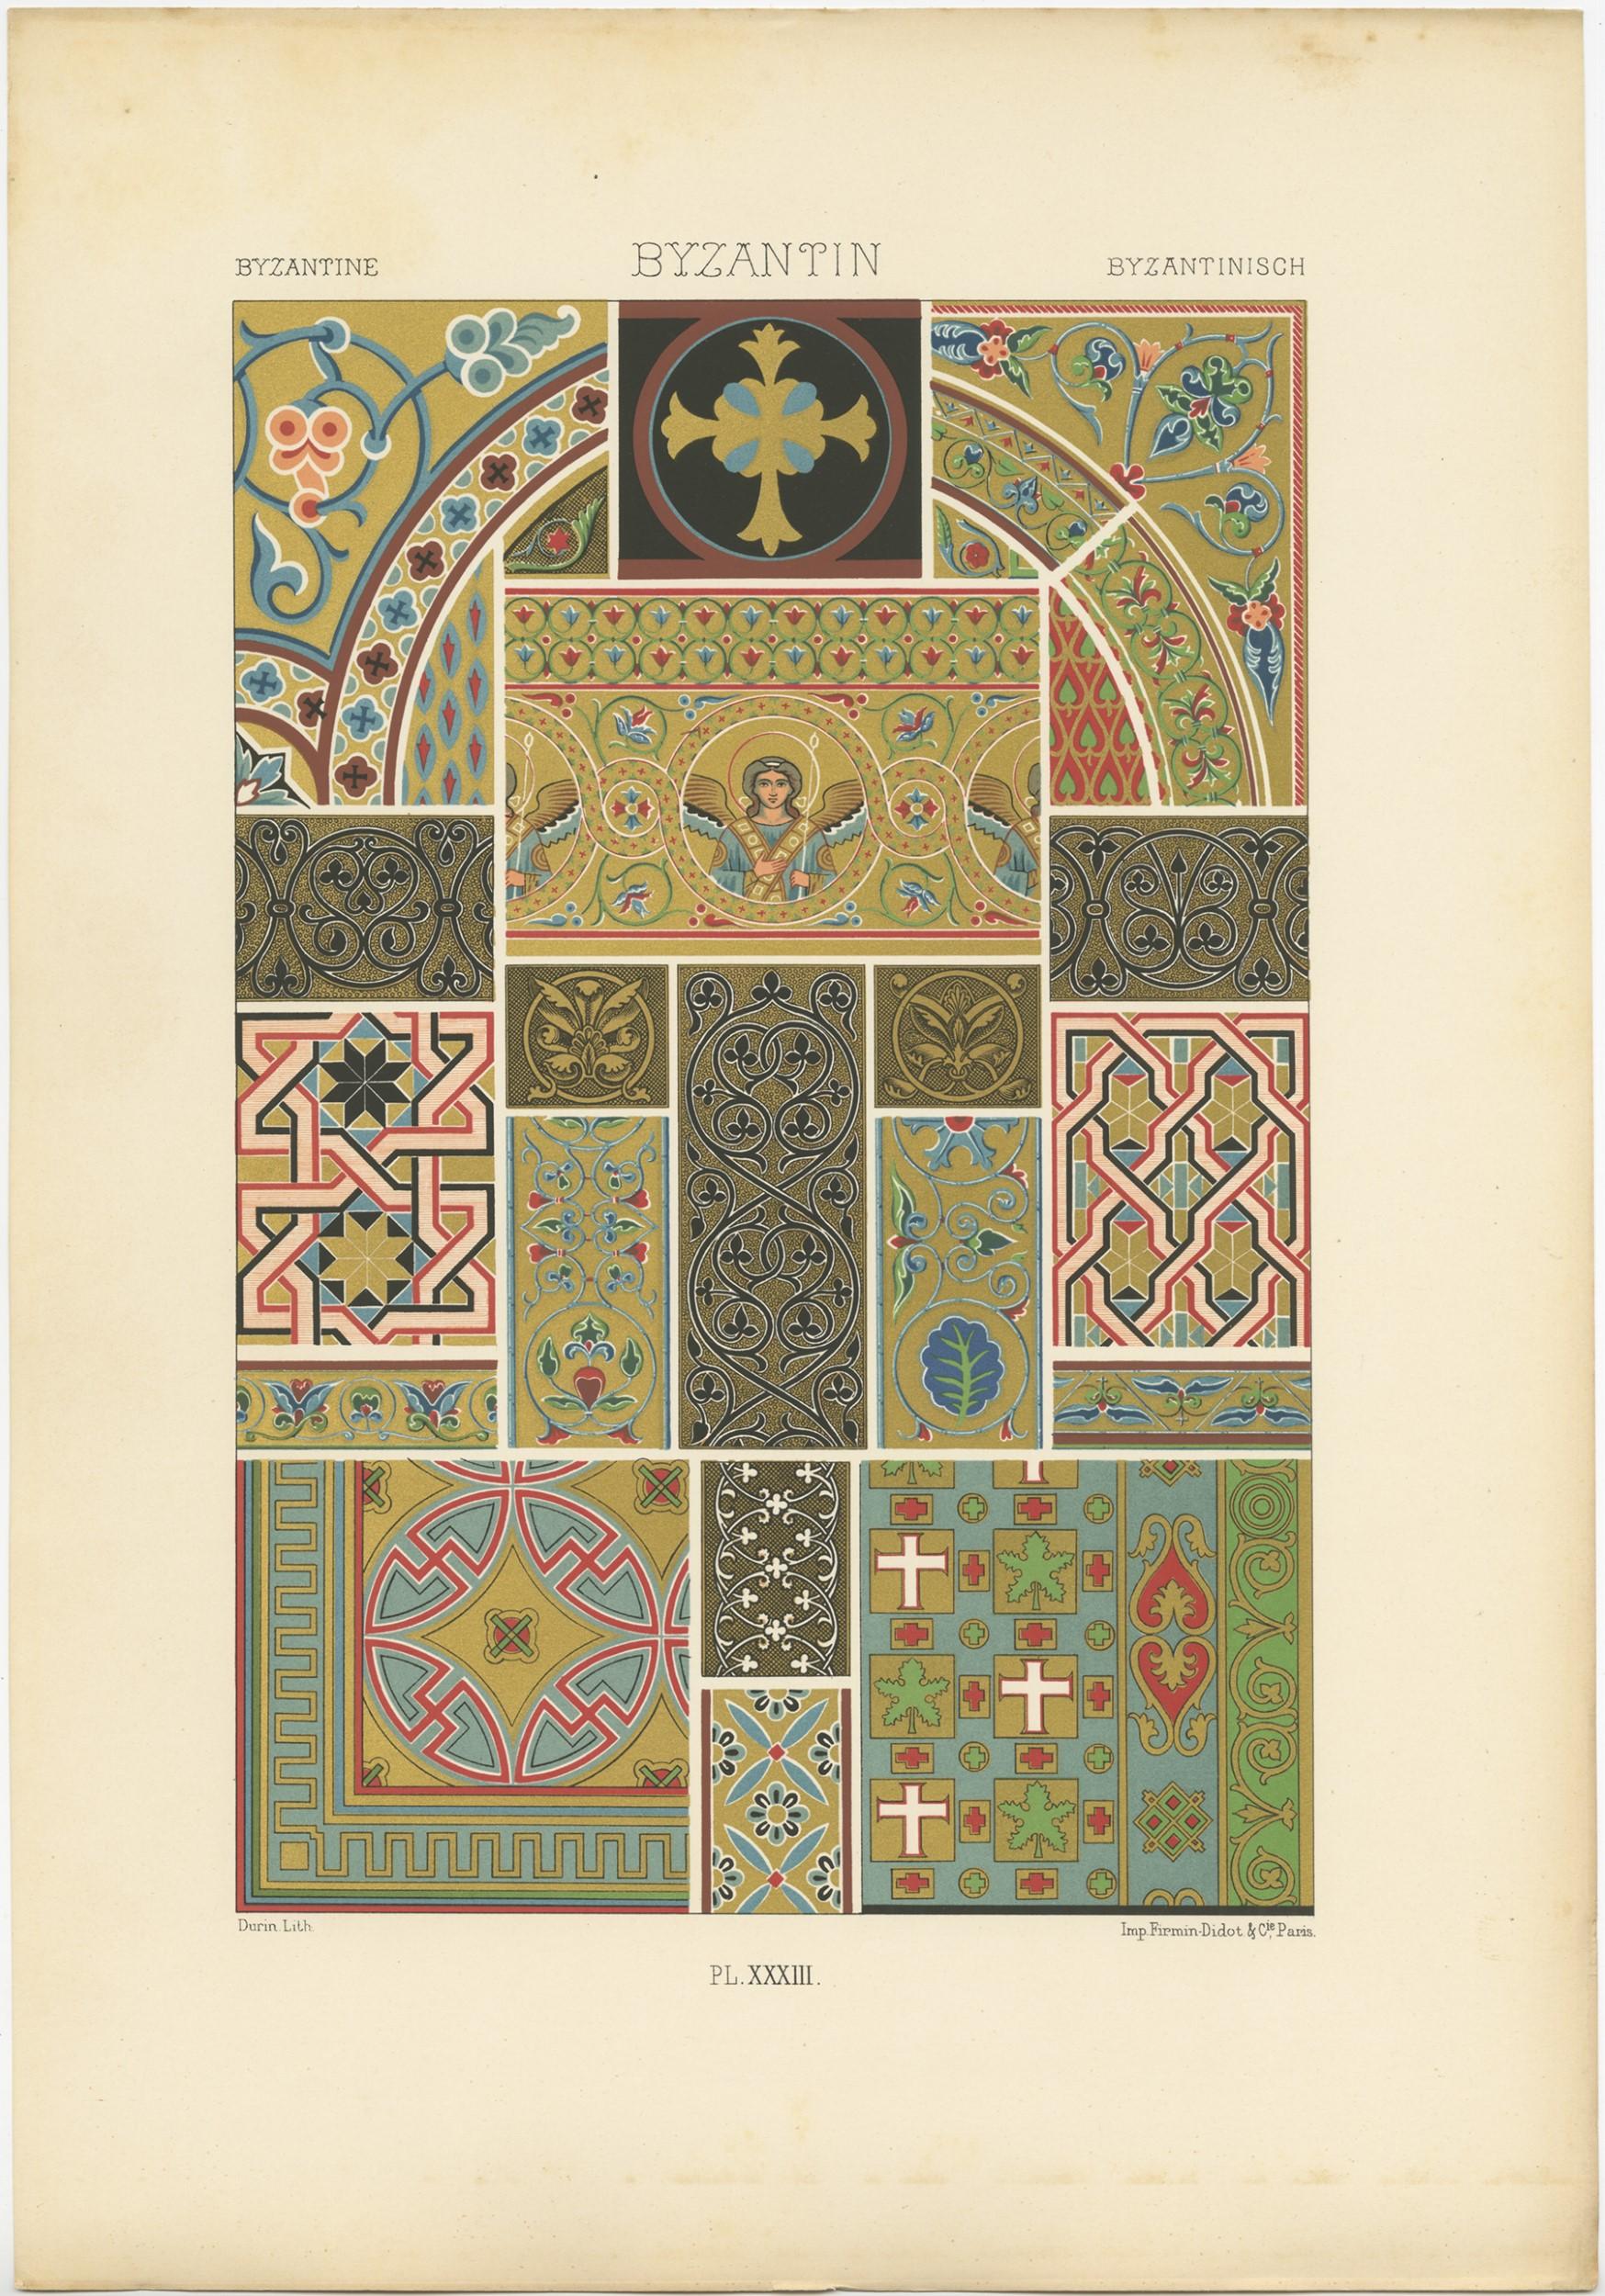 Antique print titled 'Byzantine - Byzantin - Byzantinisch'. Chromolithograph of Byzantine ornaments and decorative arts. This print originates from 'l'Ornement Polychrome' by Auguste Racinet. Published circa 1890.